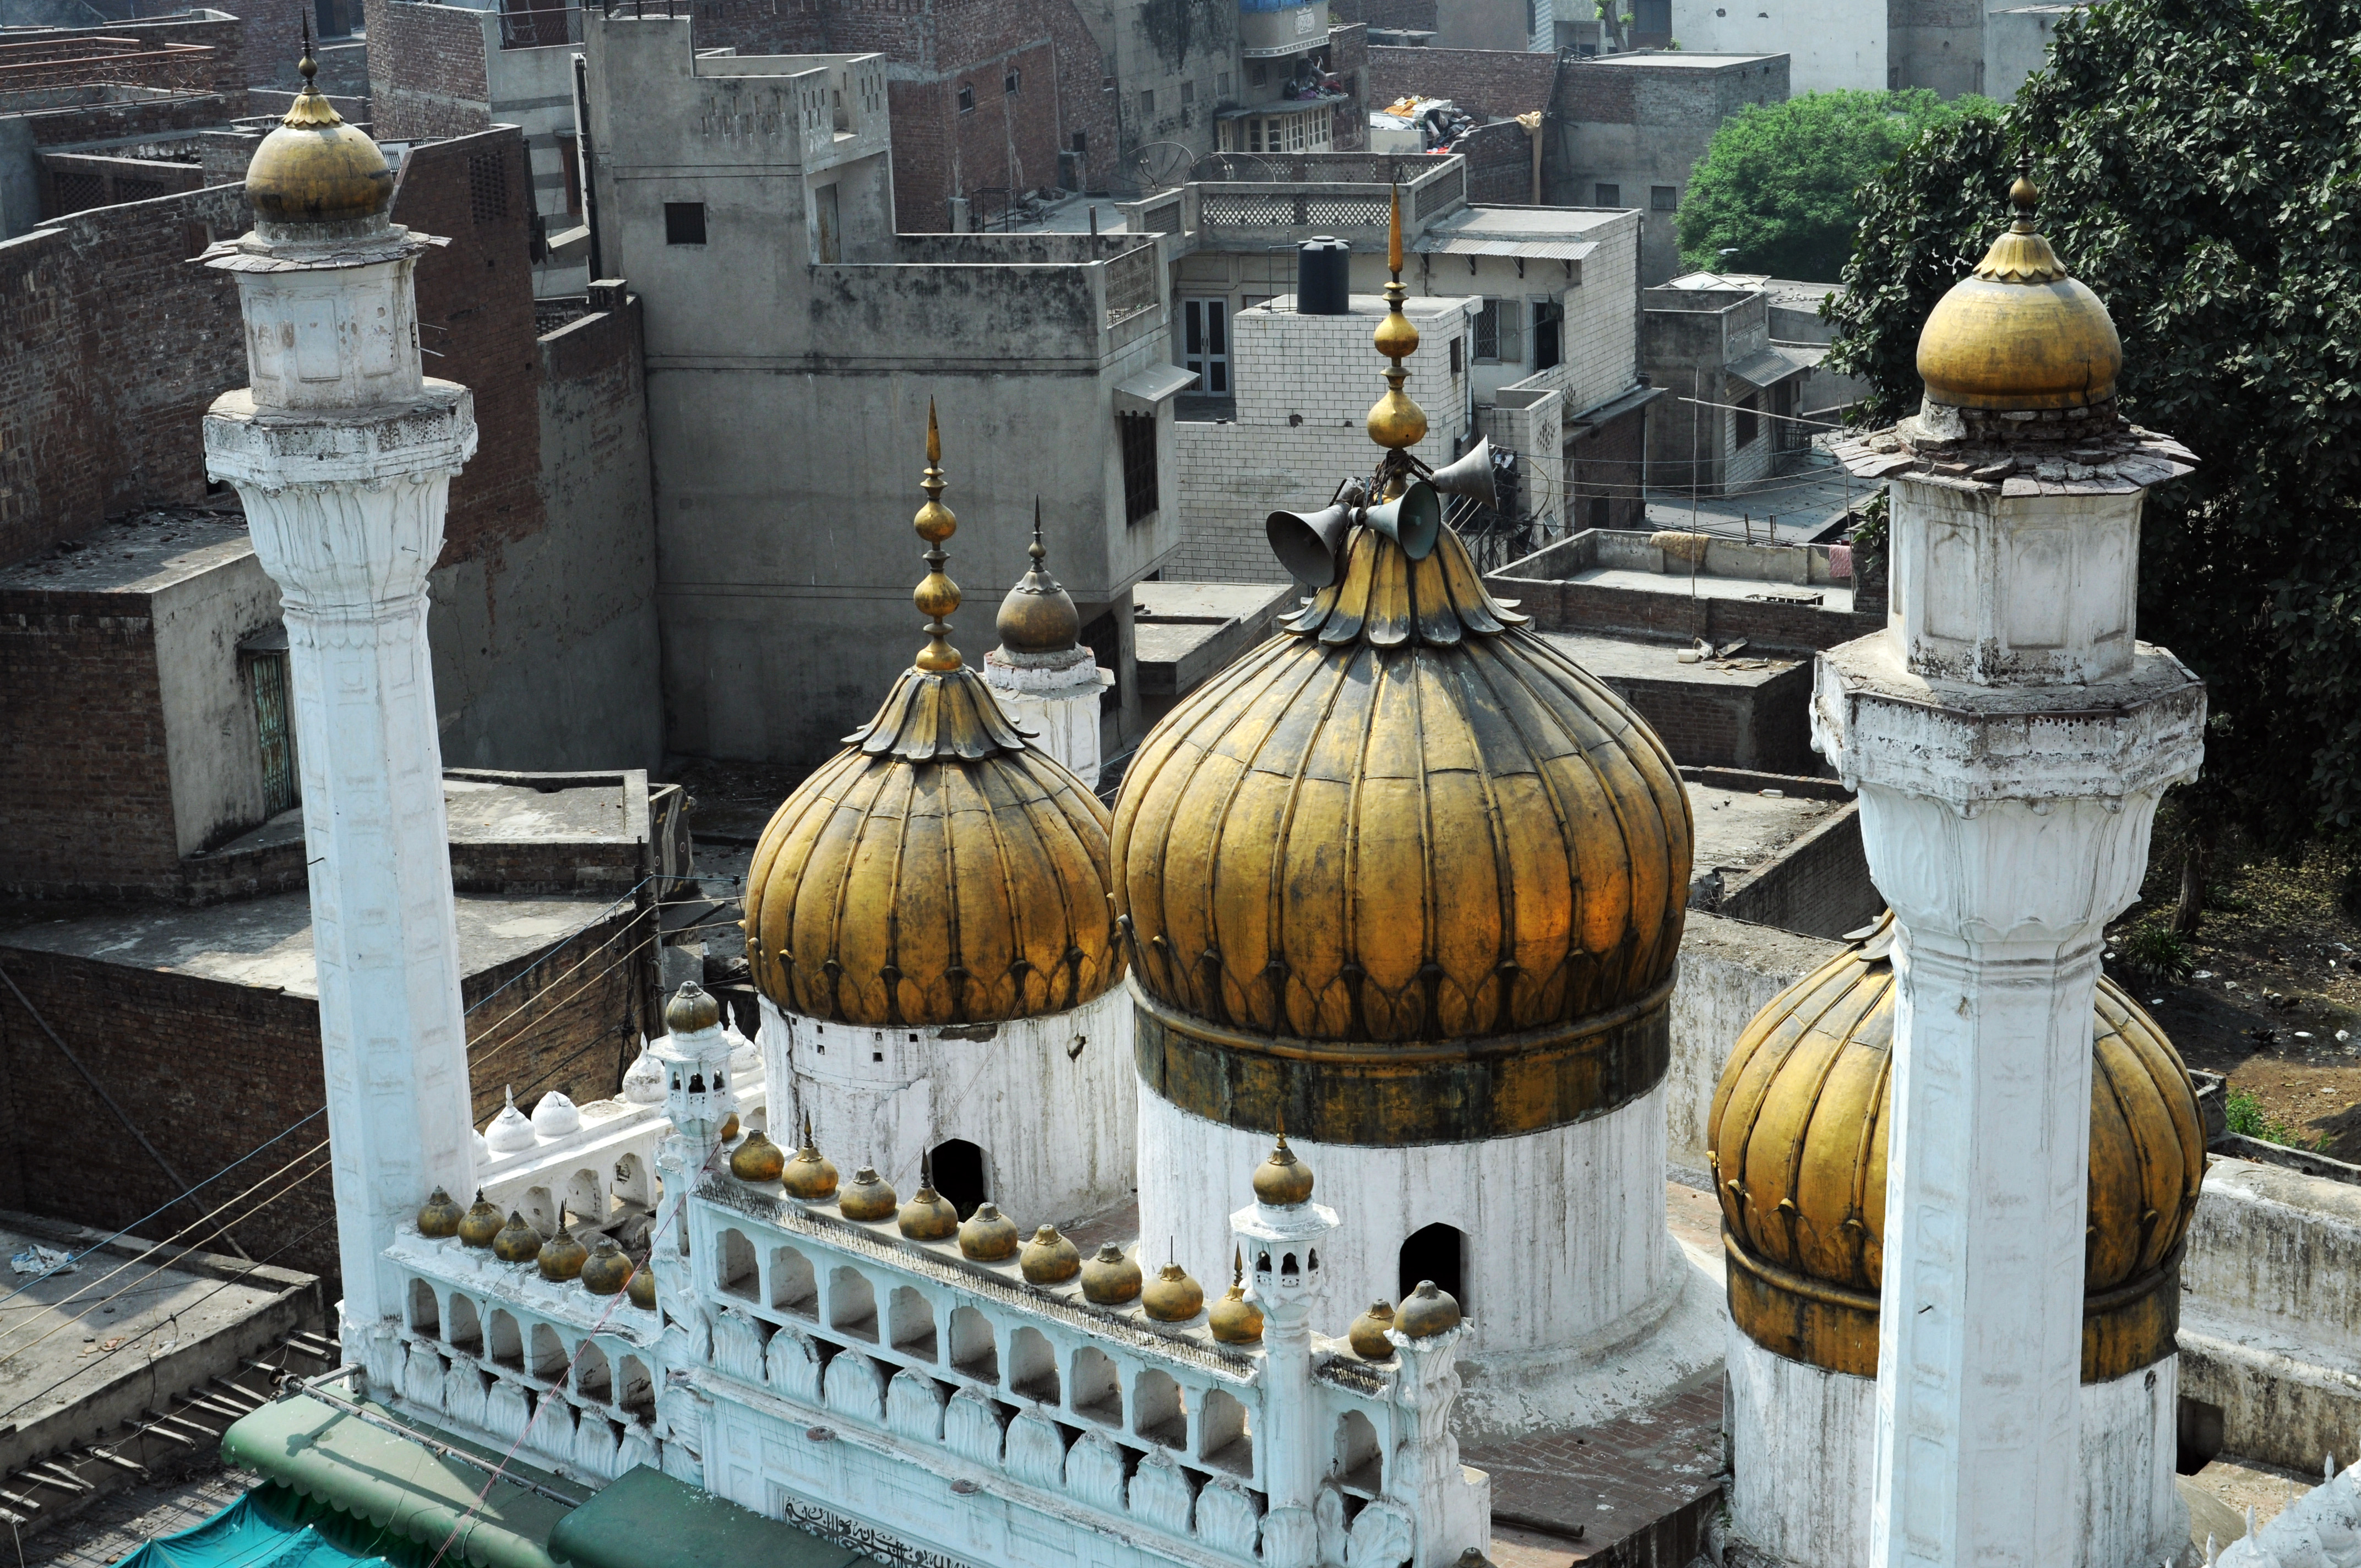 Now female worshippers can pray at Pakistan's famous Sunehri Masjid